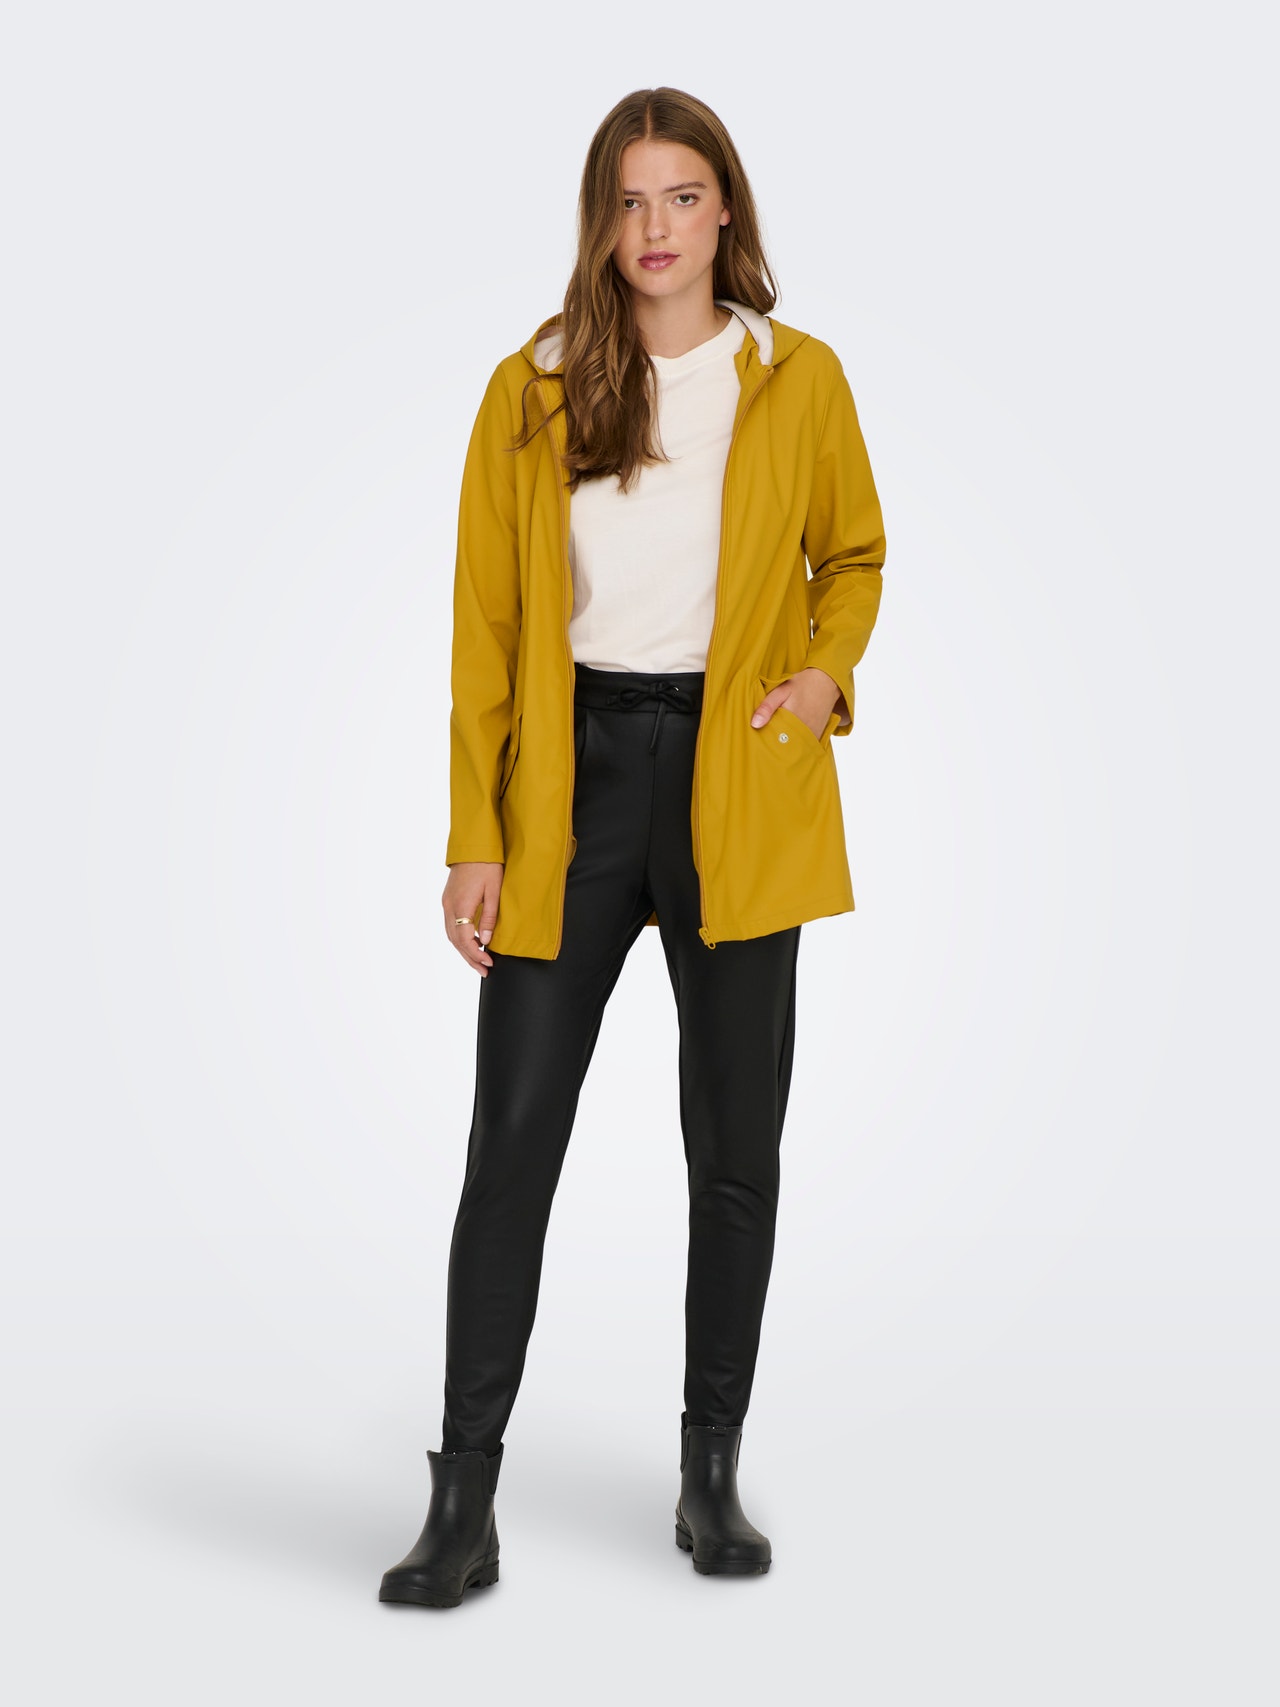 ONLY Manteaux Capuche -Golden Yellow - 15241365